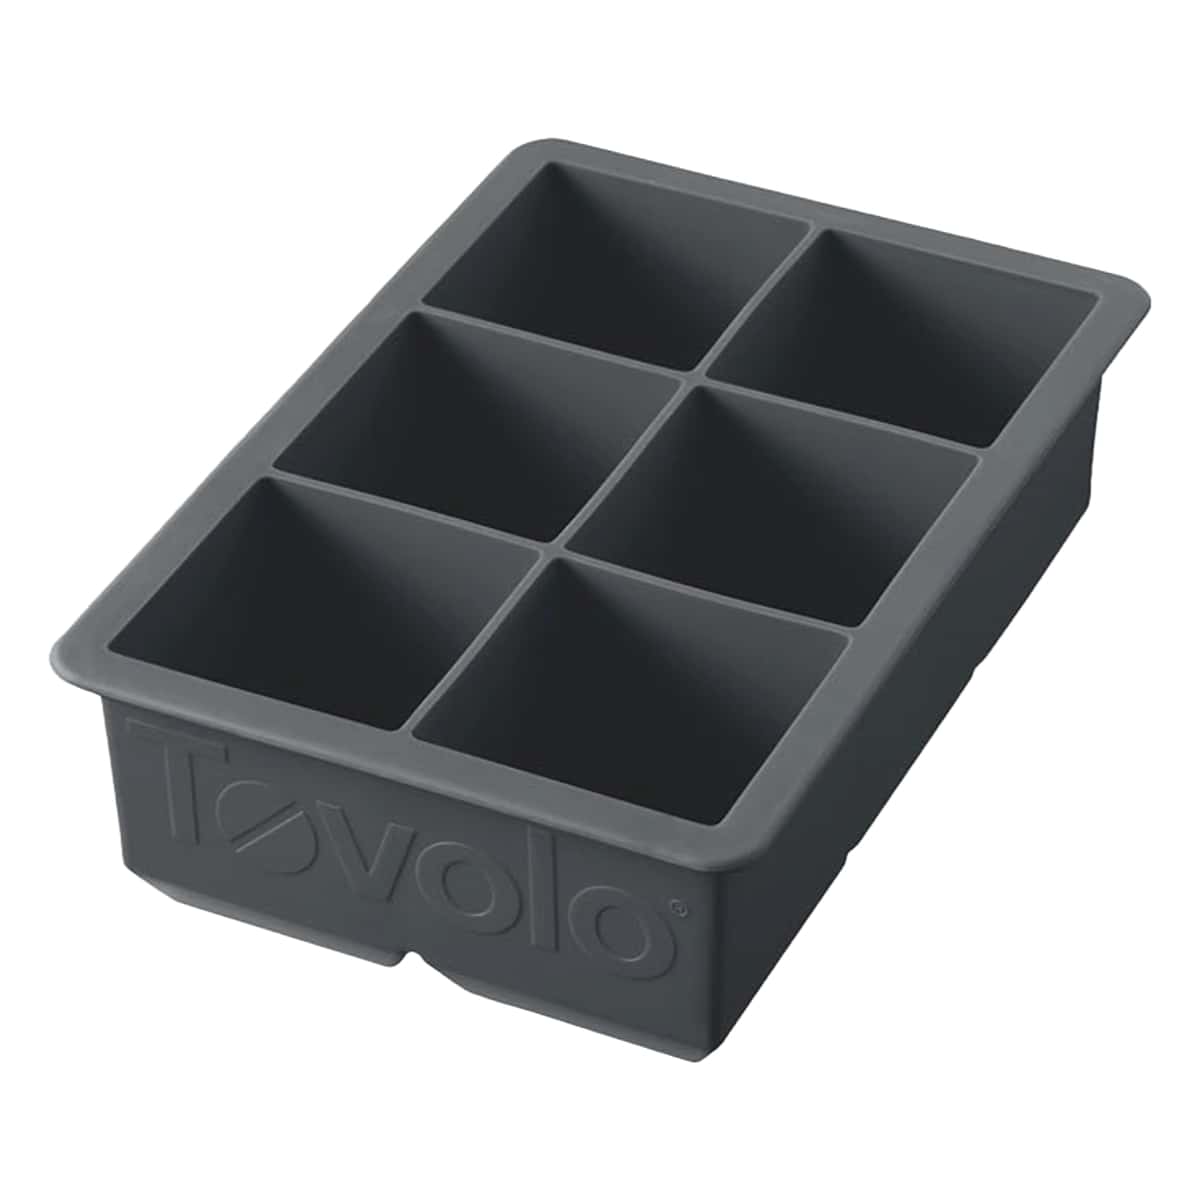 ice cube tray on a white background